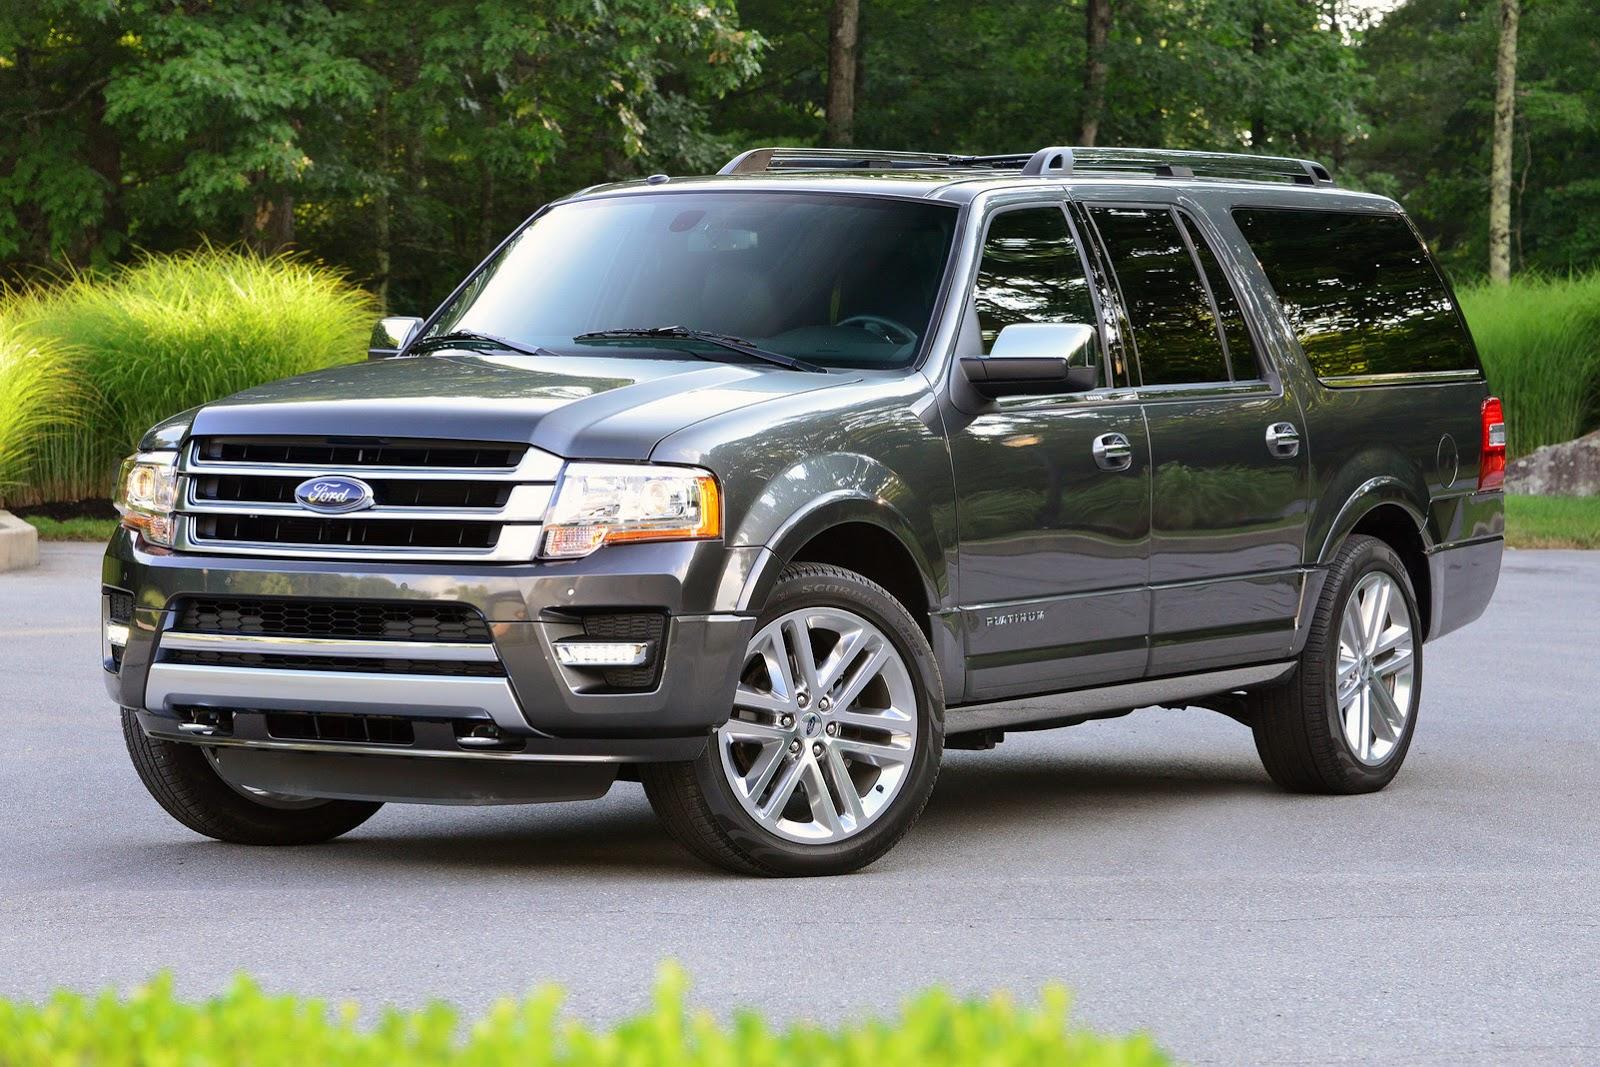 Ford Expedition Exterior Wallpaper HD Car